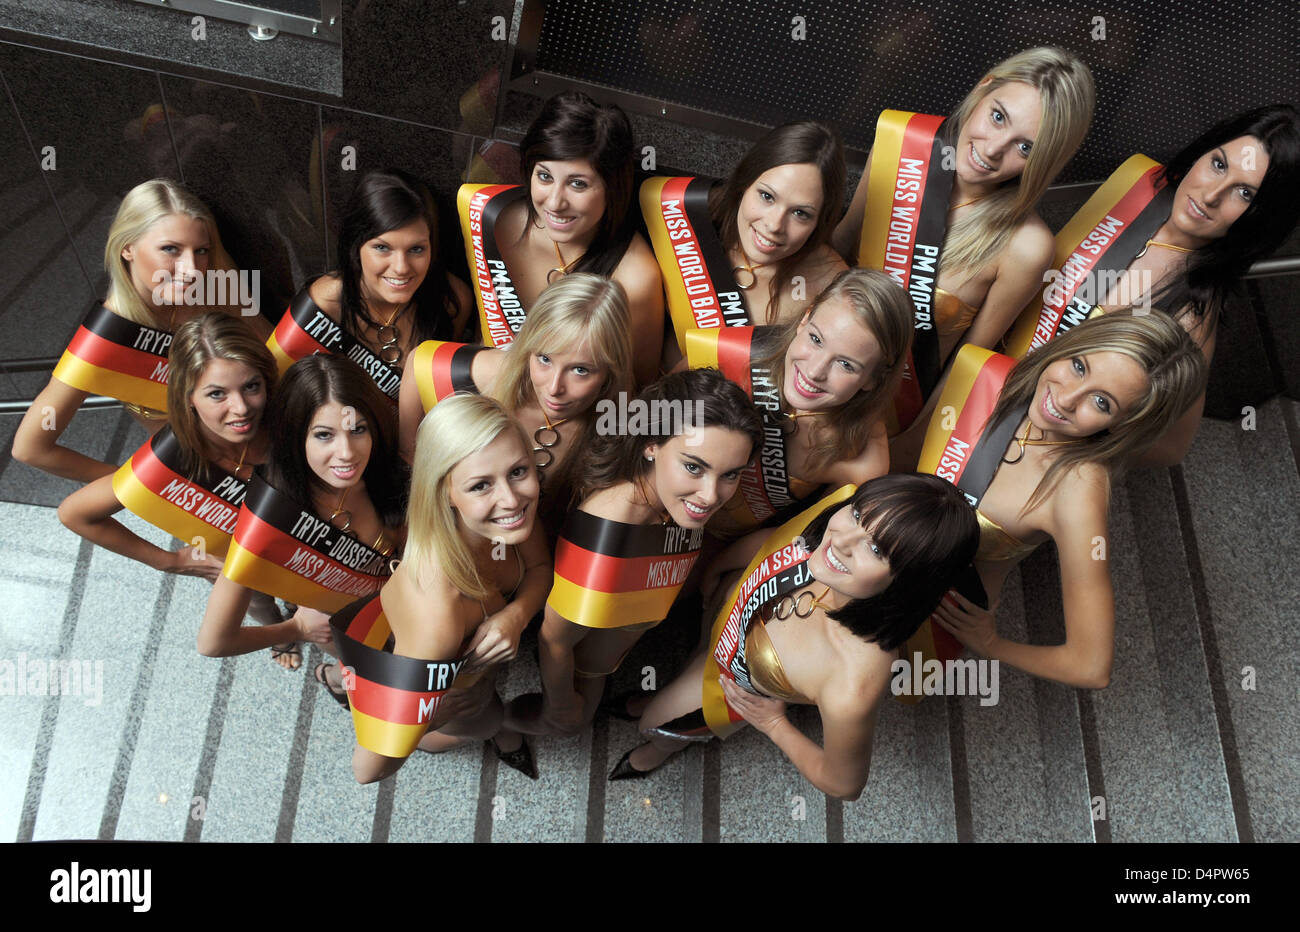 The 14 candidates for Miss World Germany 2009 pageant pose in Ratingen, Germany, 04 September 2009. The winner of the finals on 05 September will represent Germany in the Miss World 2009 pageant taking place in Johannesburg, South Africa. Photo: JOERG CARSTENSEN Stock Photo